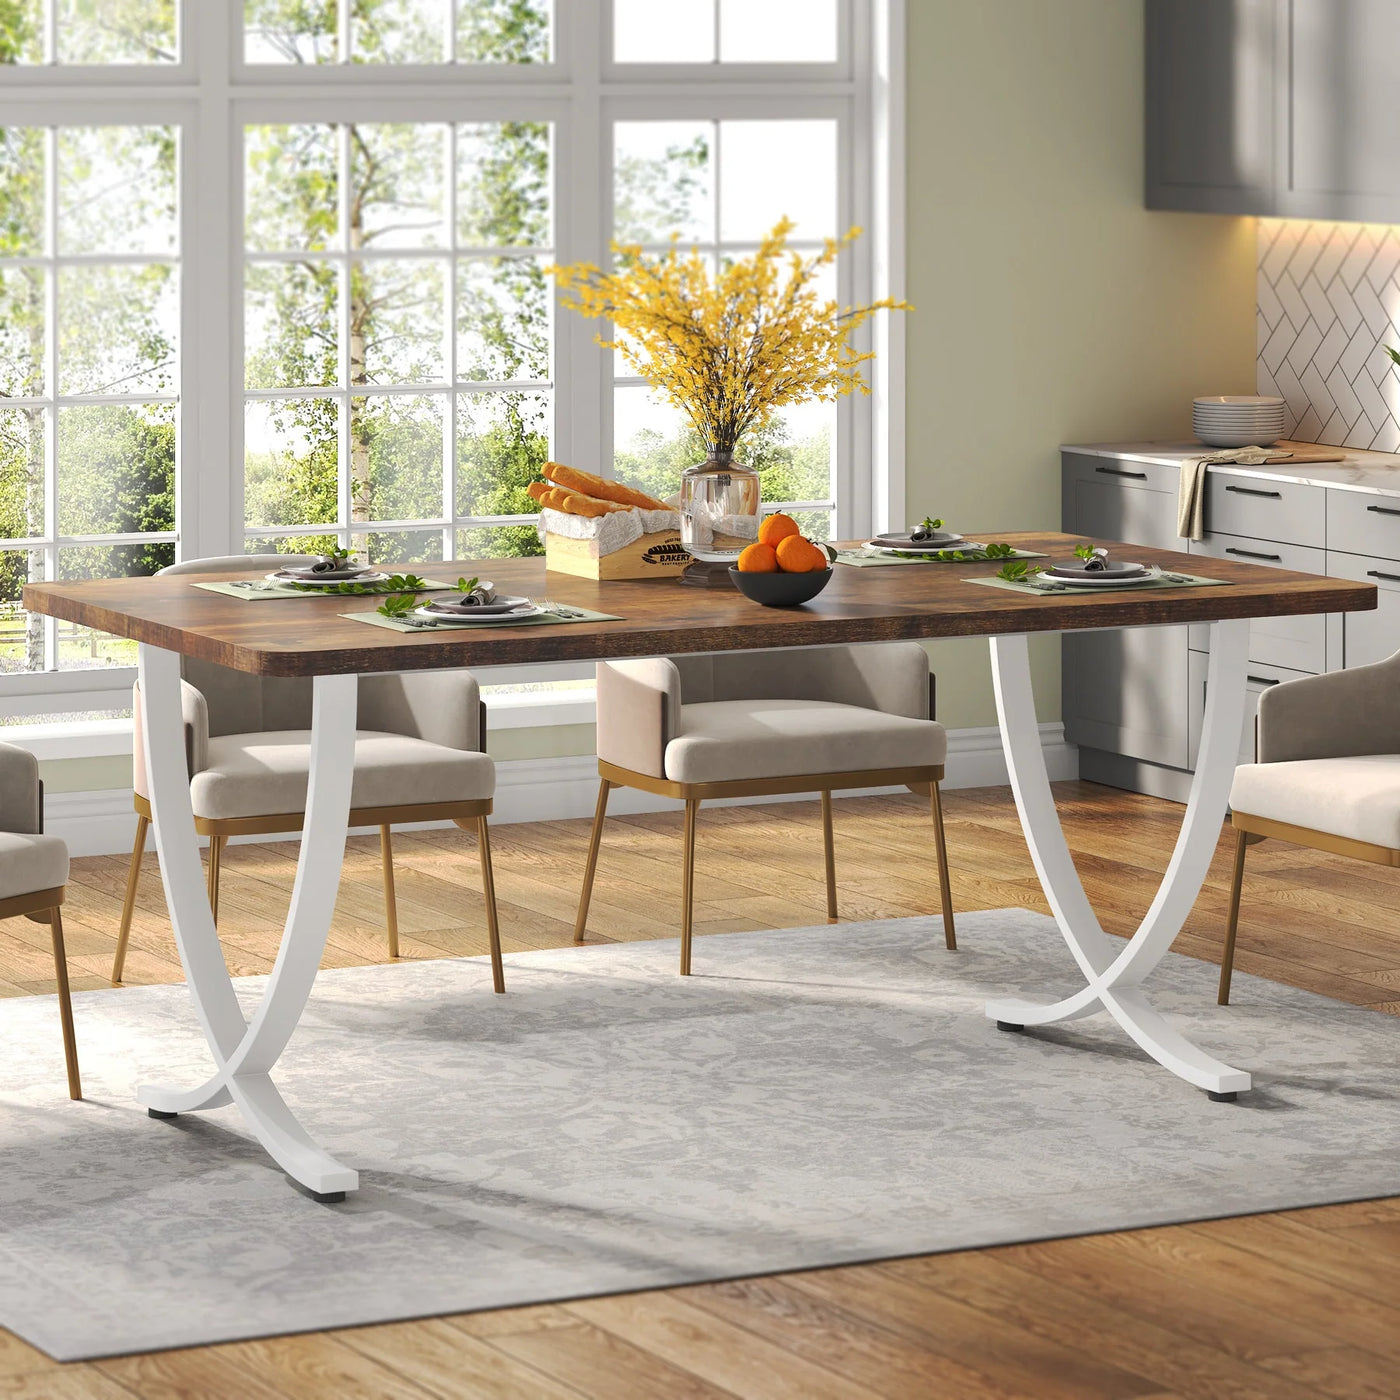 Dhabi 63" Modern Dining Table | Kitchen Table with Faux Marble Table Top White Black Gold Metal Base